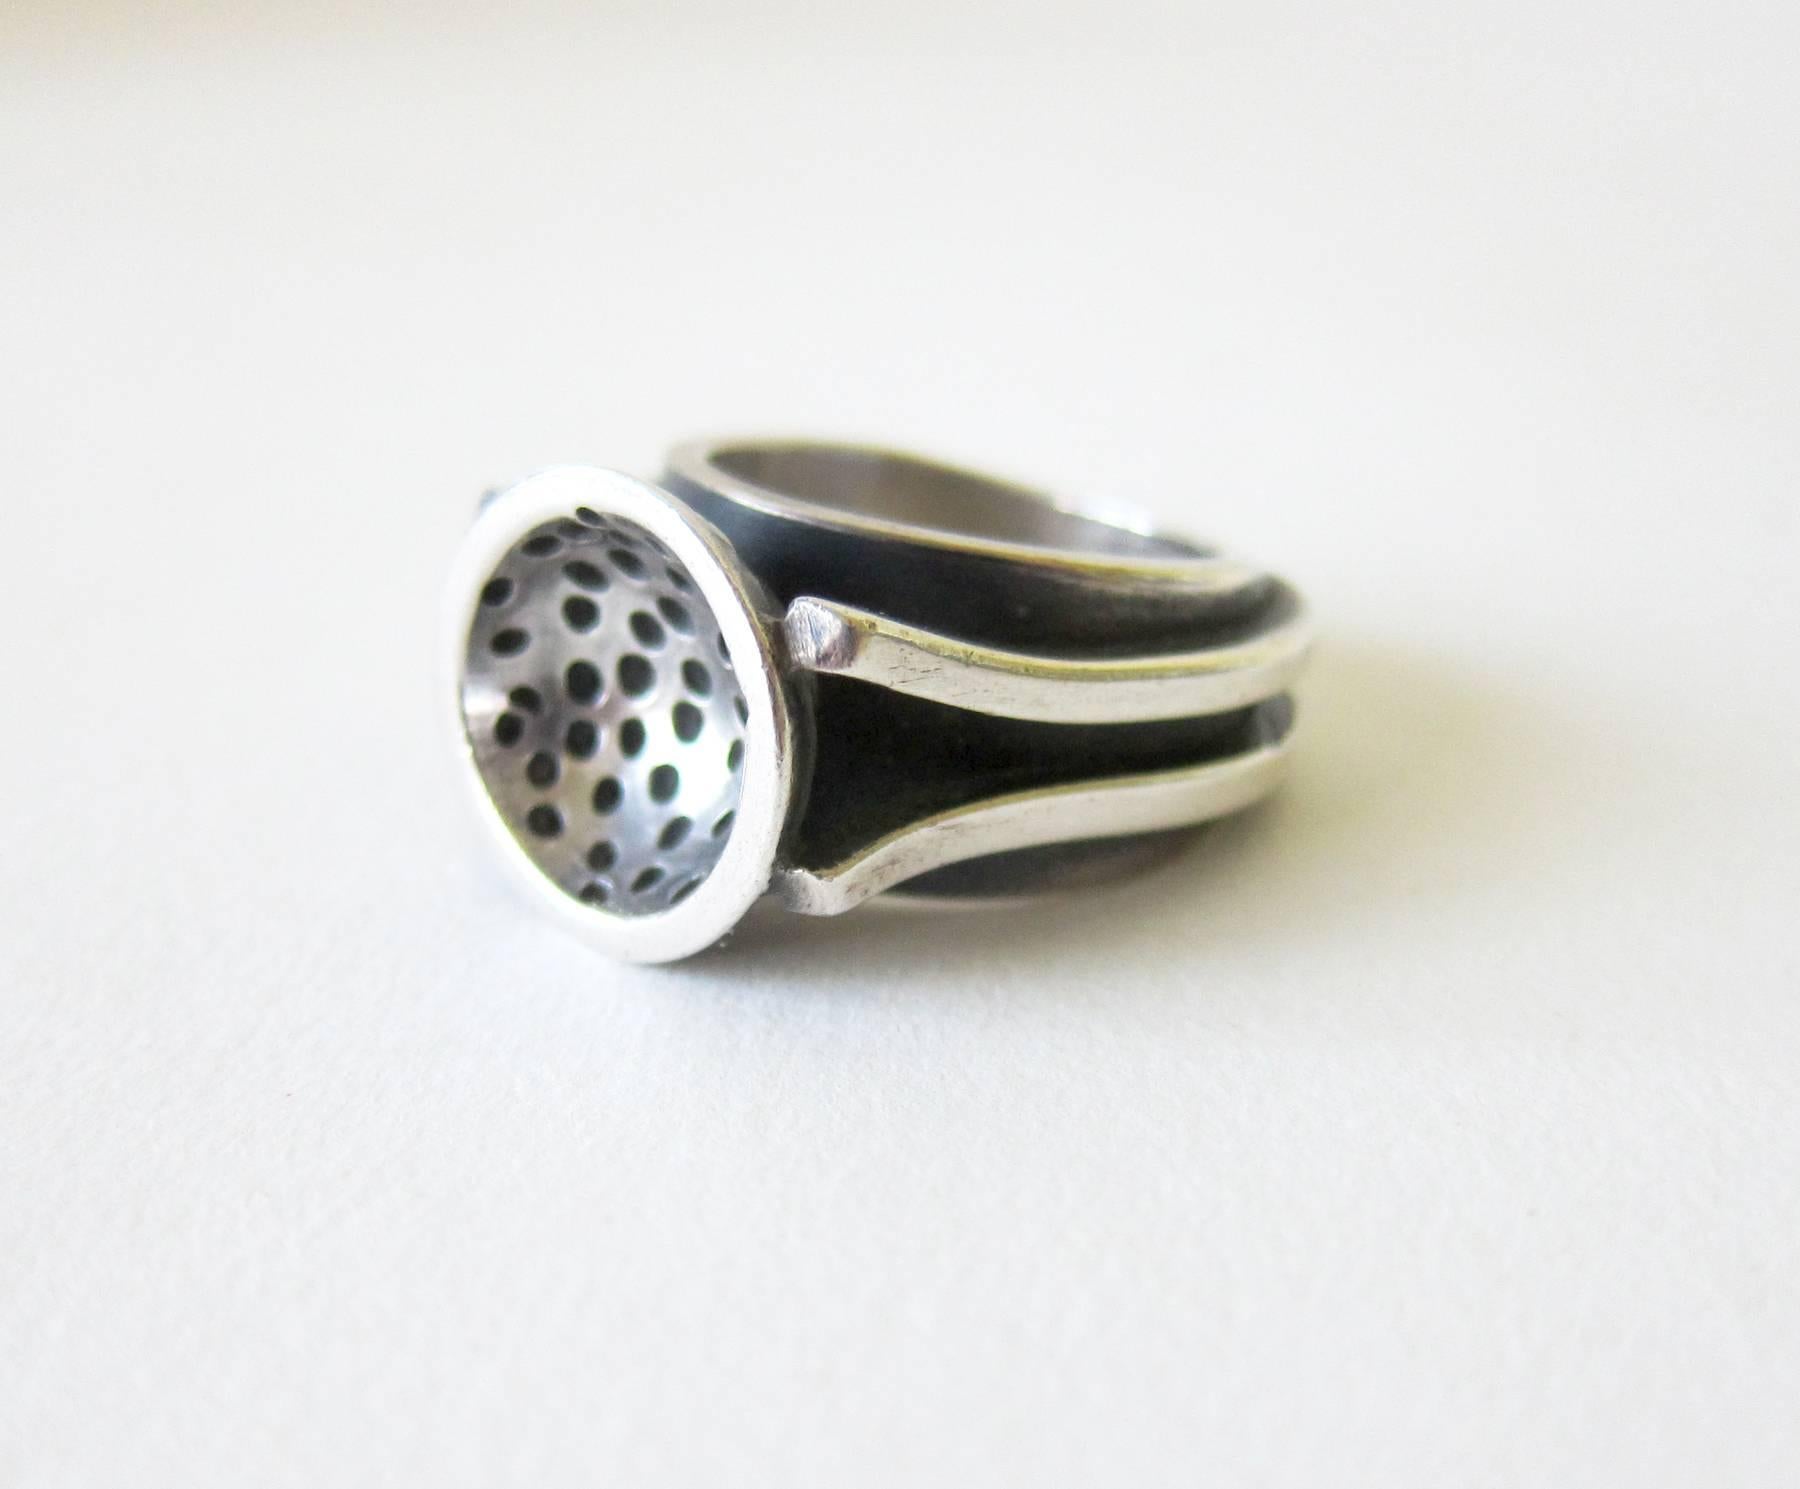 Sterling silver modernist ring created by James Parker of San Diego, California. Ring is a finger size 8 and is signed with the conjoined JP cypher, Hand Made, Sterling.  Suitable for a man or woman and in very good vintage condition.

